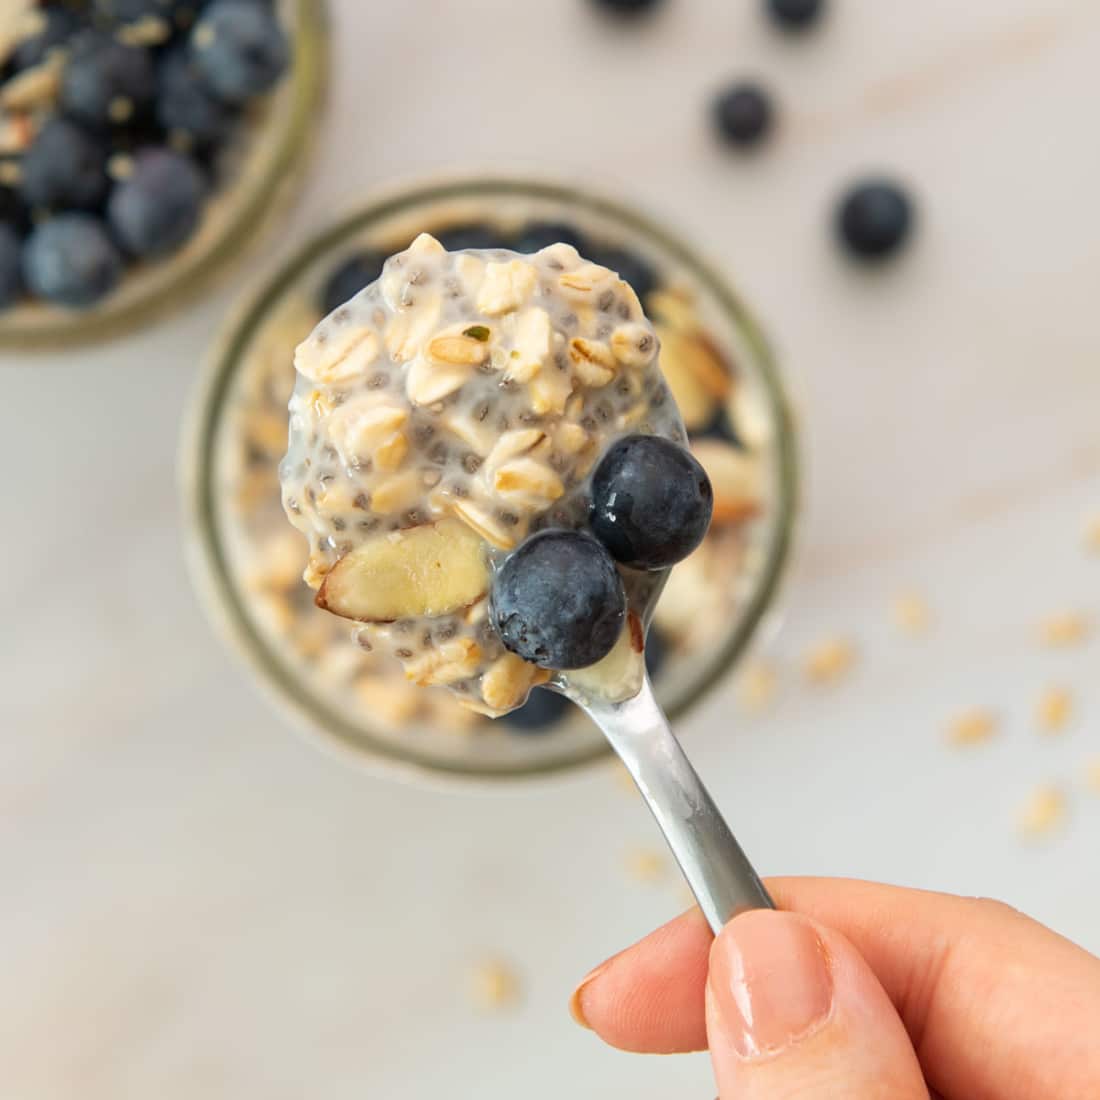 scoop of chia and oat pudding with blueberries and almonds